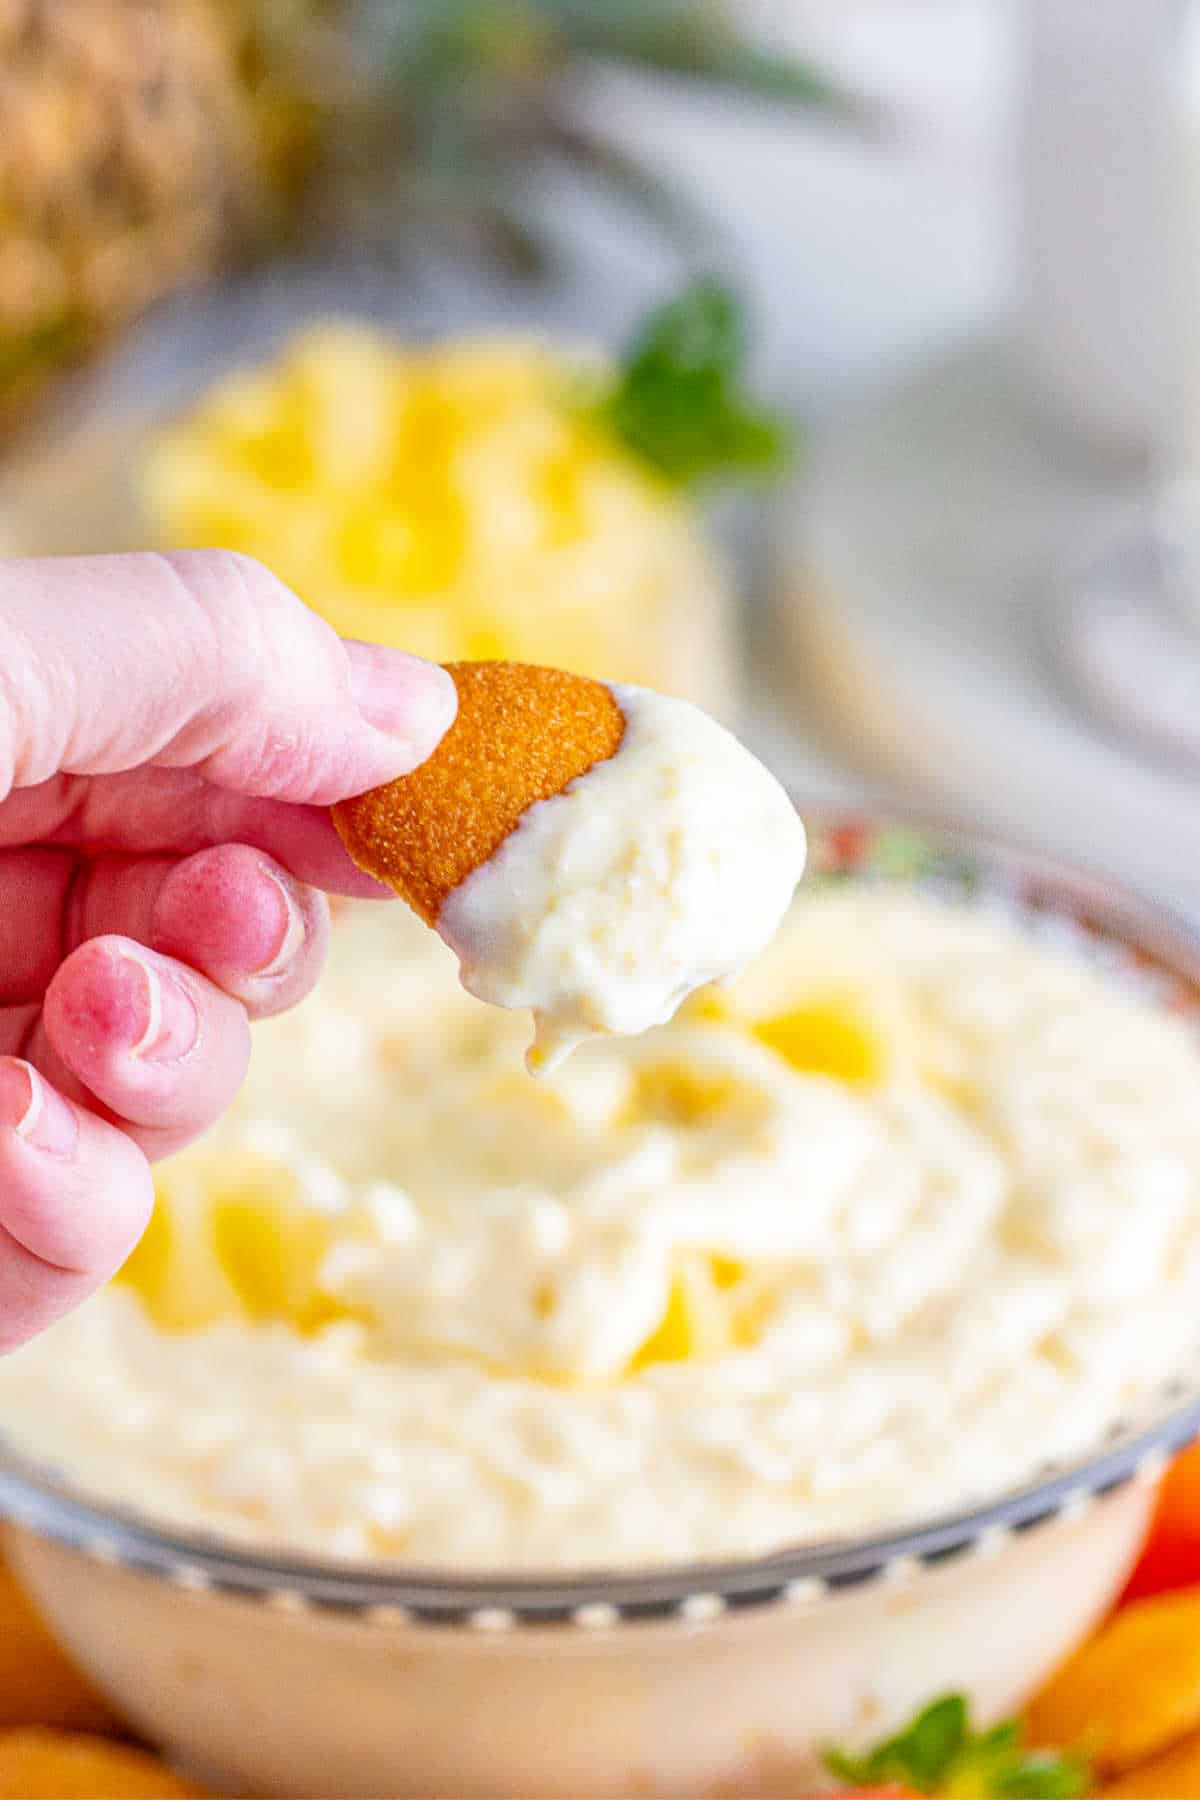 A hand holding a cookie with pineapple dip.